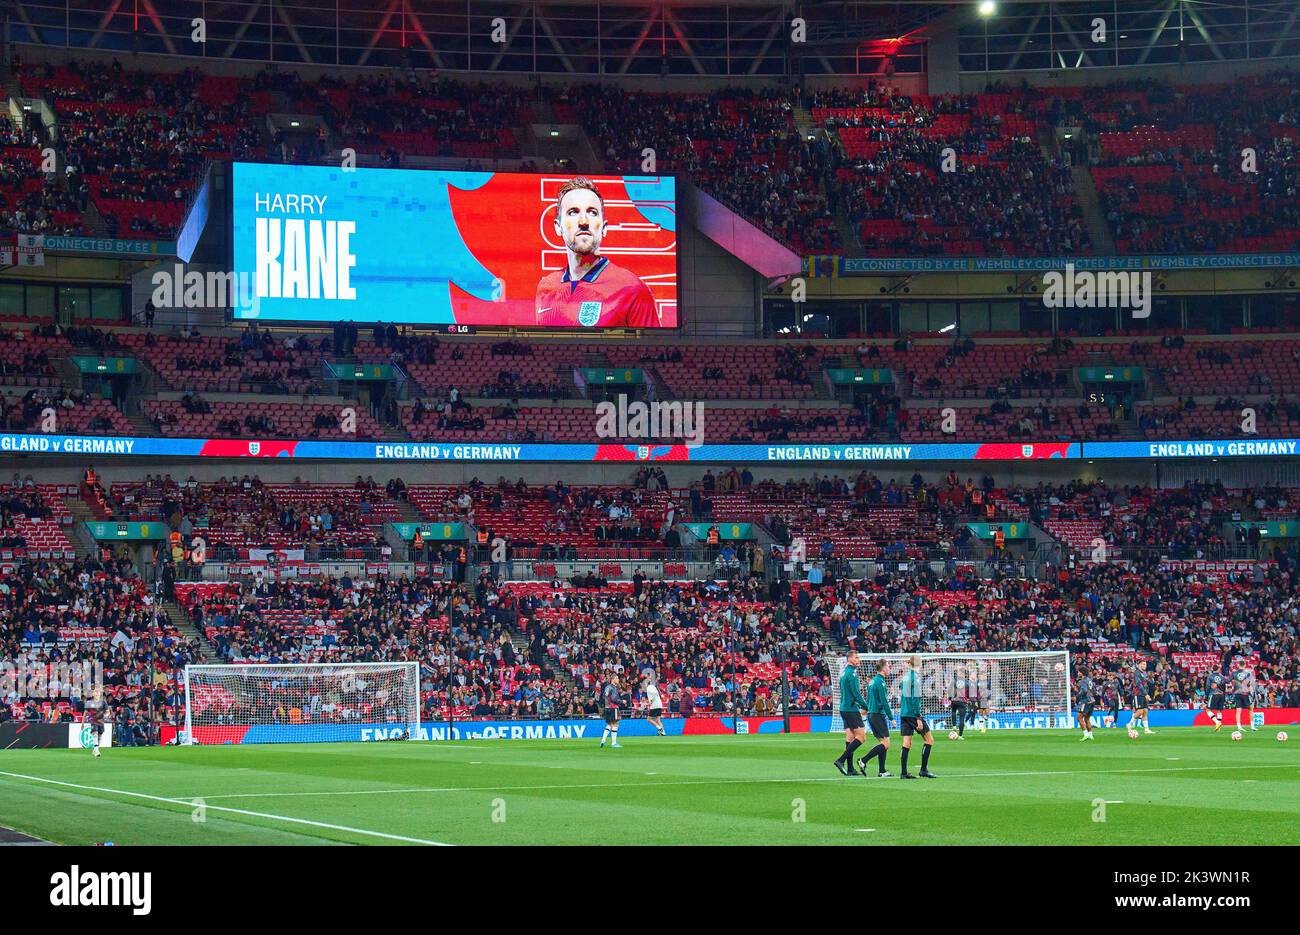 Harry KANE, England 9   on the screen of Wembley in the UEFA Nations League 2022 match  ENGLAND - GERMANY 3-3  in Season 2022/2023 on Sept 26, 2022  in London, Great Britain.  © Peter Schatz / Alamy Live News Stock Photo